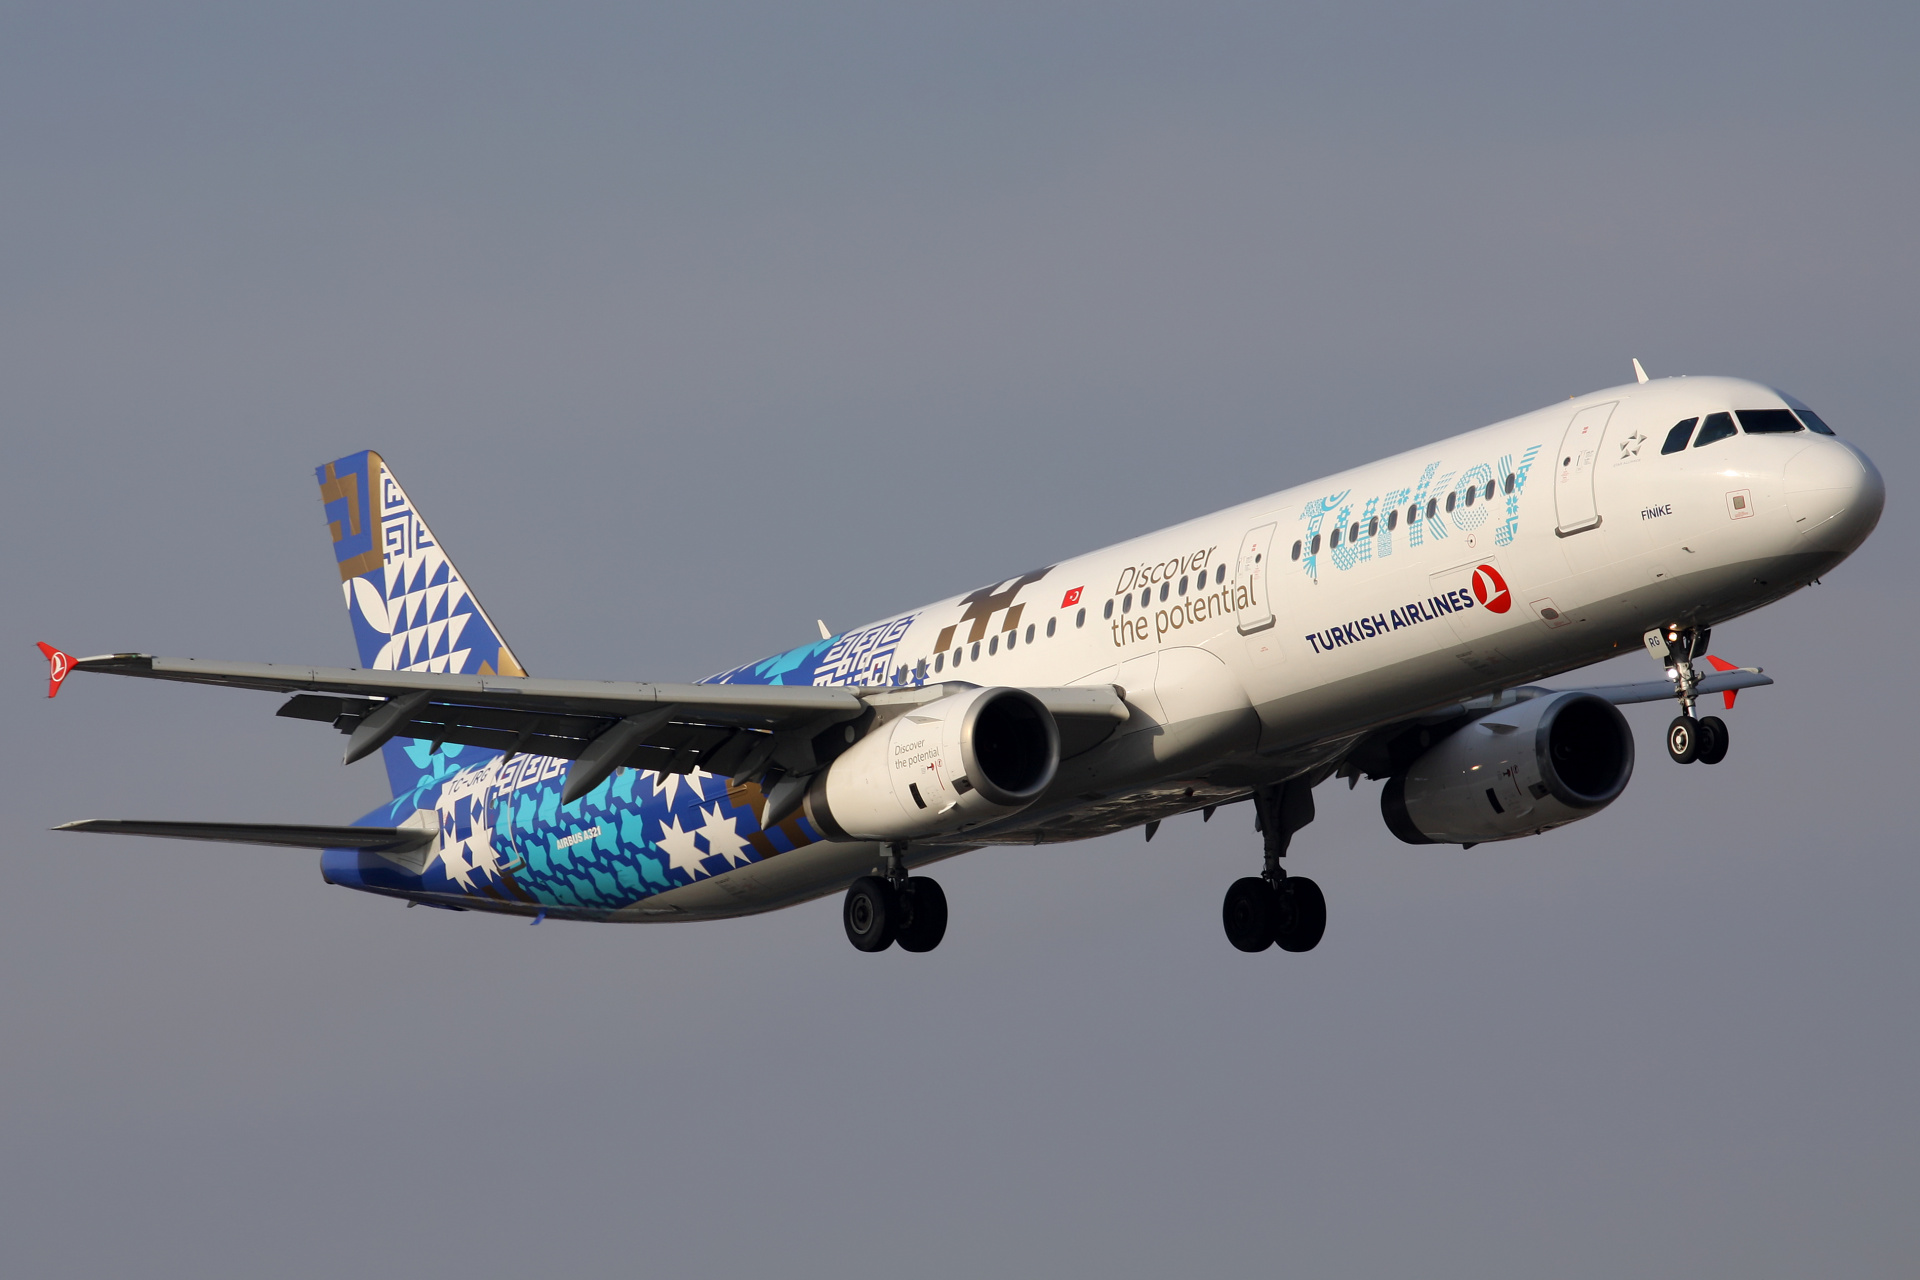 TC-JRG (Turkey - Discover the Potential livery) (Aircraft » EPWA Spotting » Airbus A321-200 » THY Turkish Airlines)